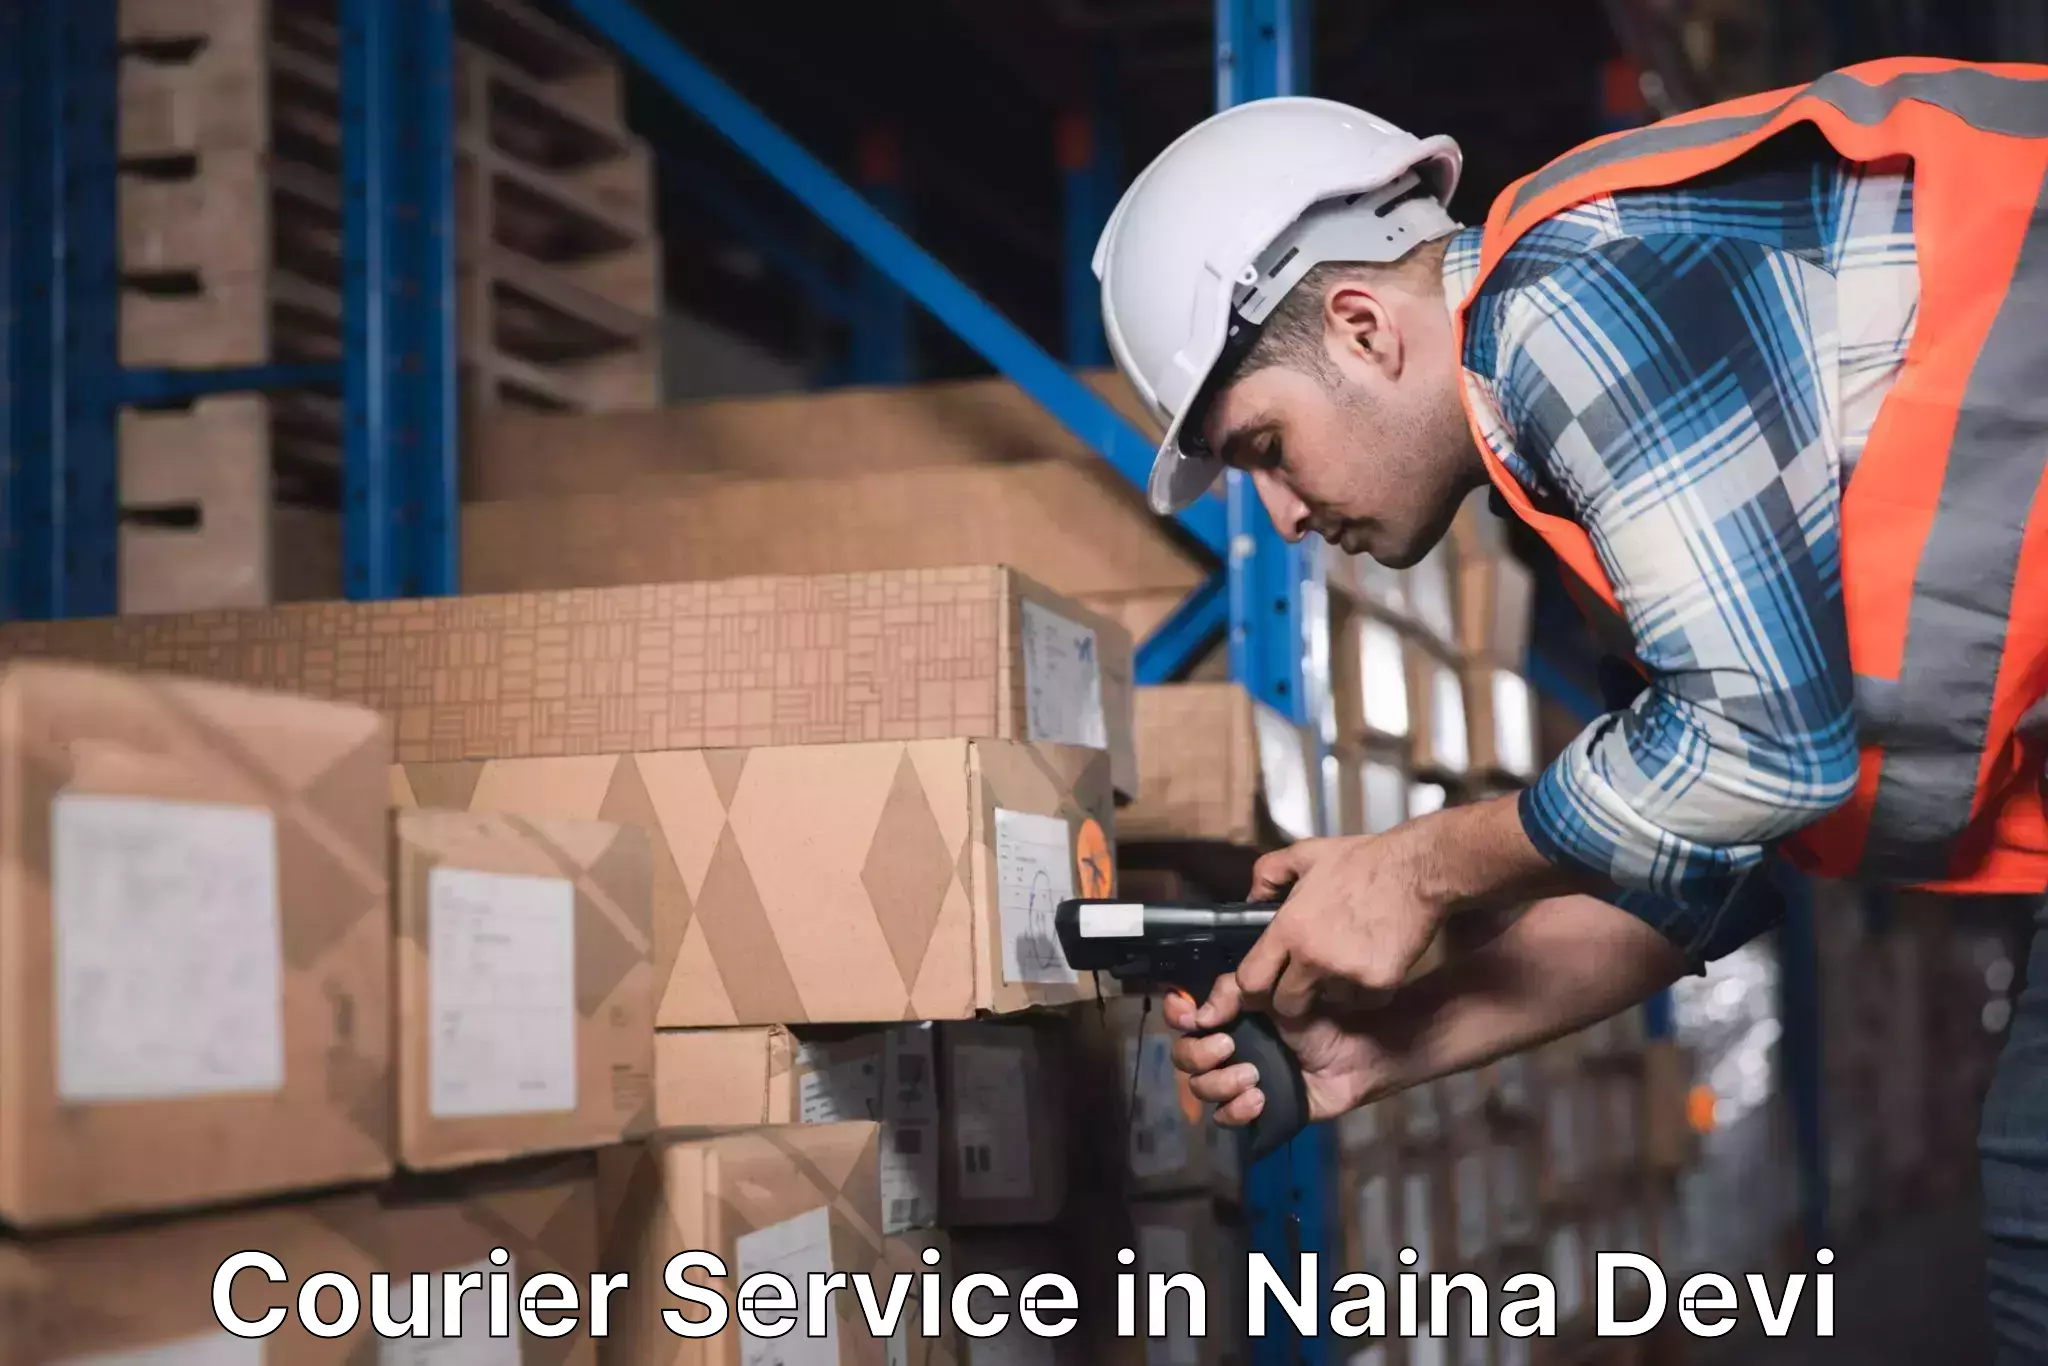 Customer-friendly courier services in Naina Devi